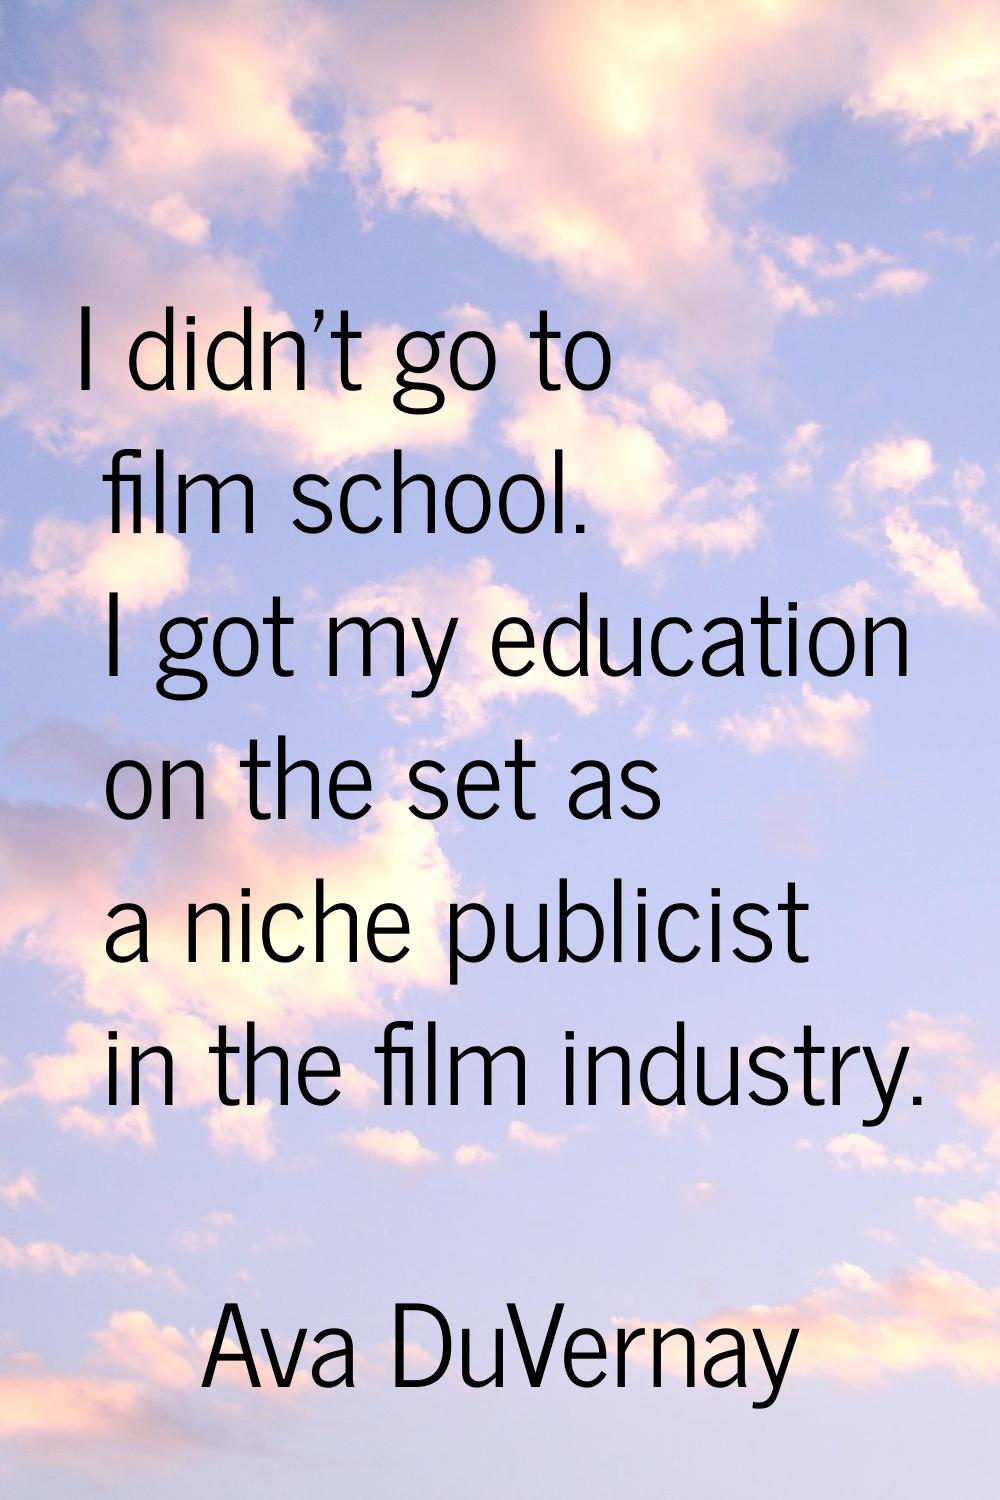 I didn't go to film school. I got my education on the set as a niche publicist in the film industry